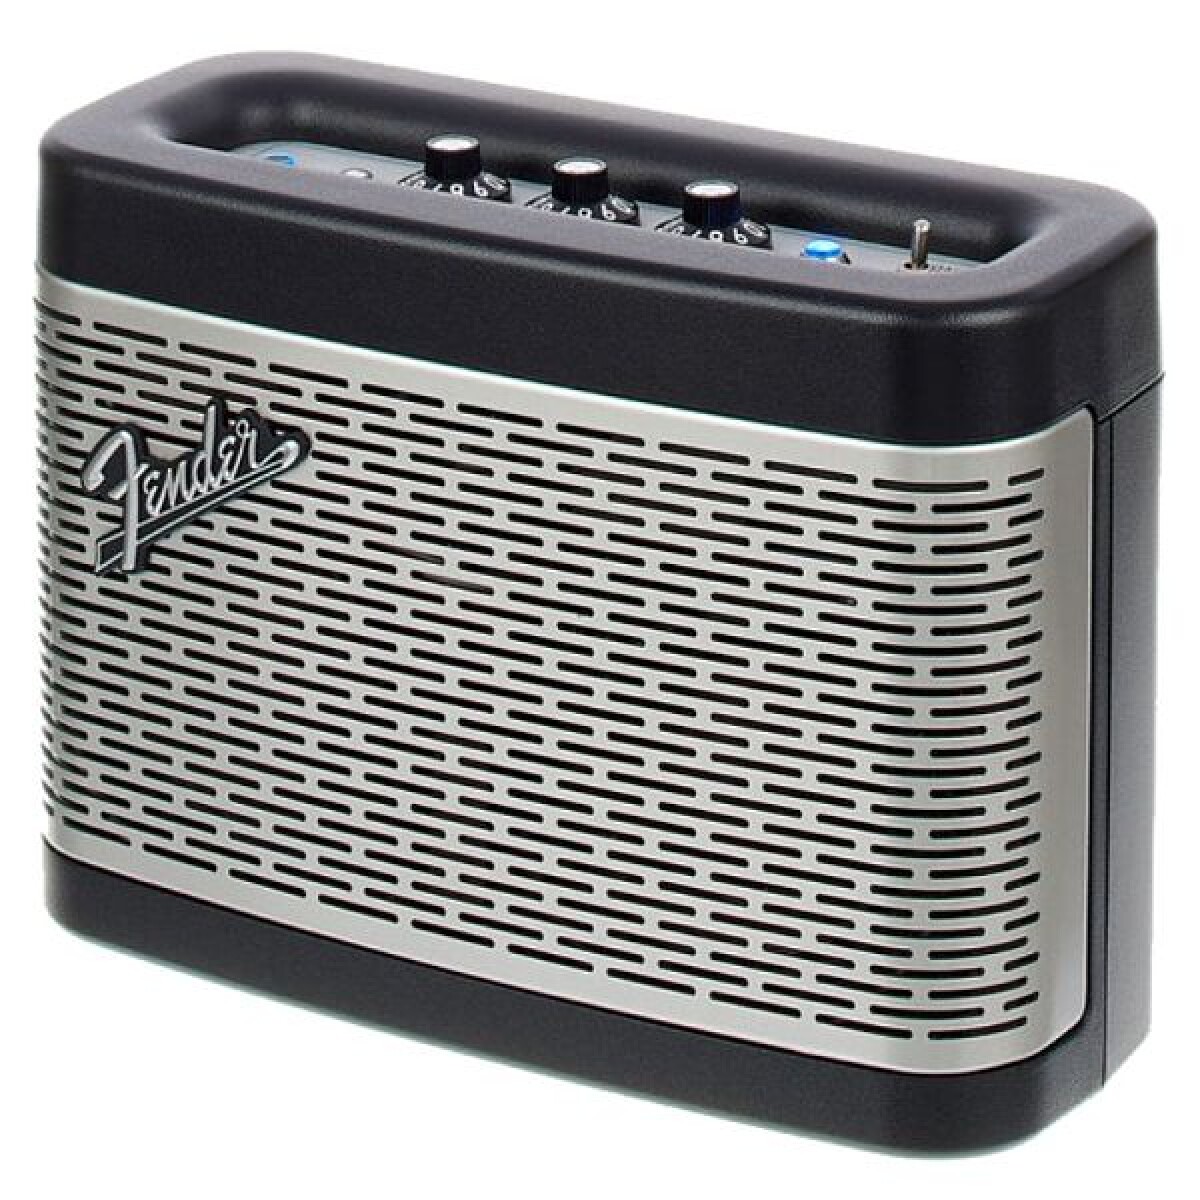 Reproductor Bluetooth Fender New Port 